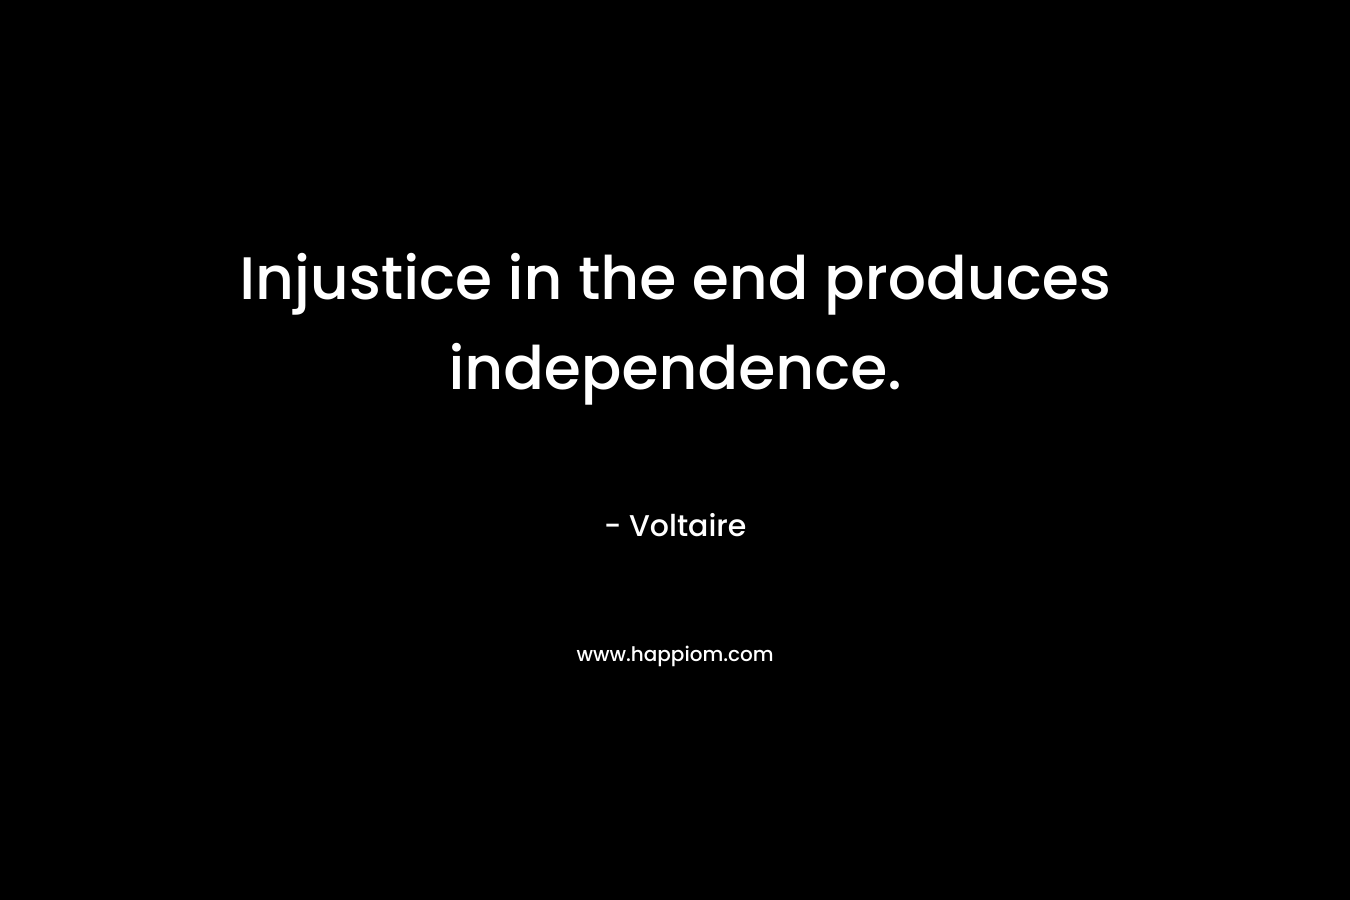 Injustice in the end produces independence. – Voltaire